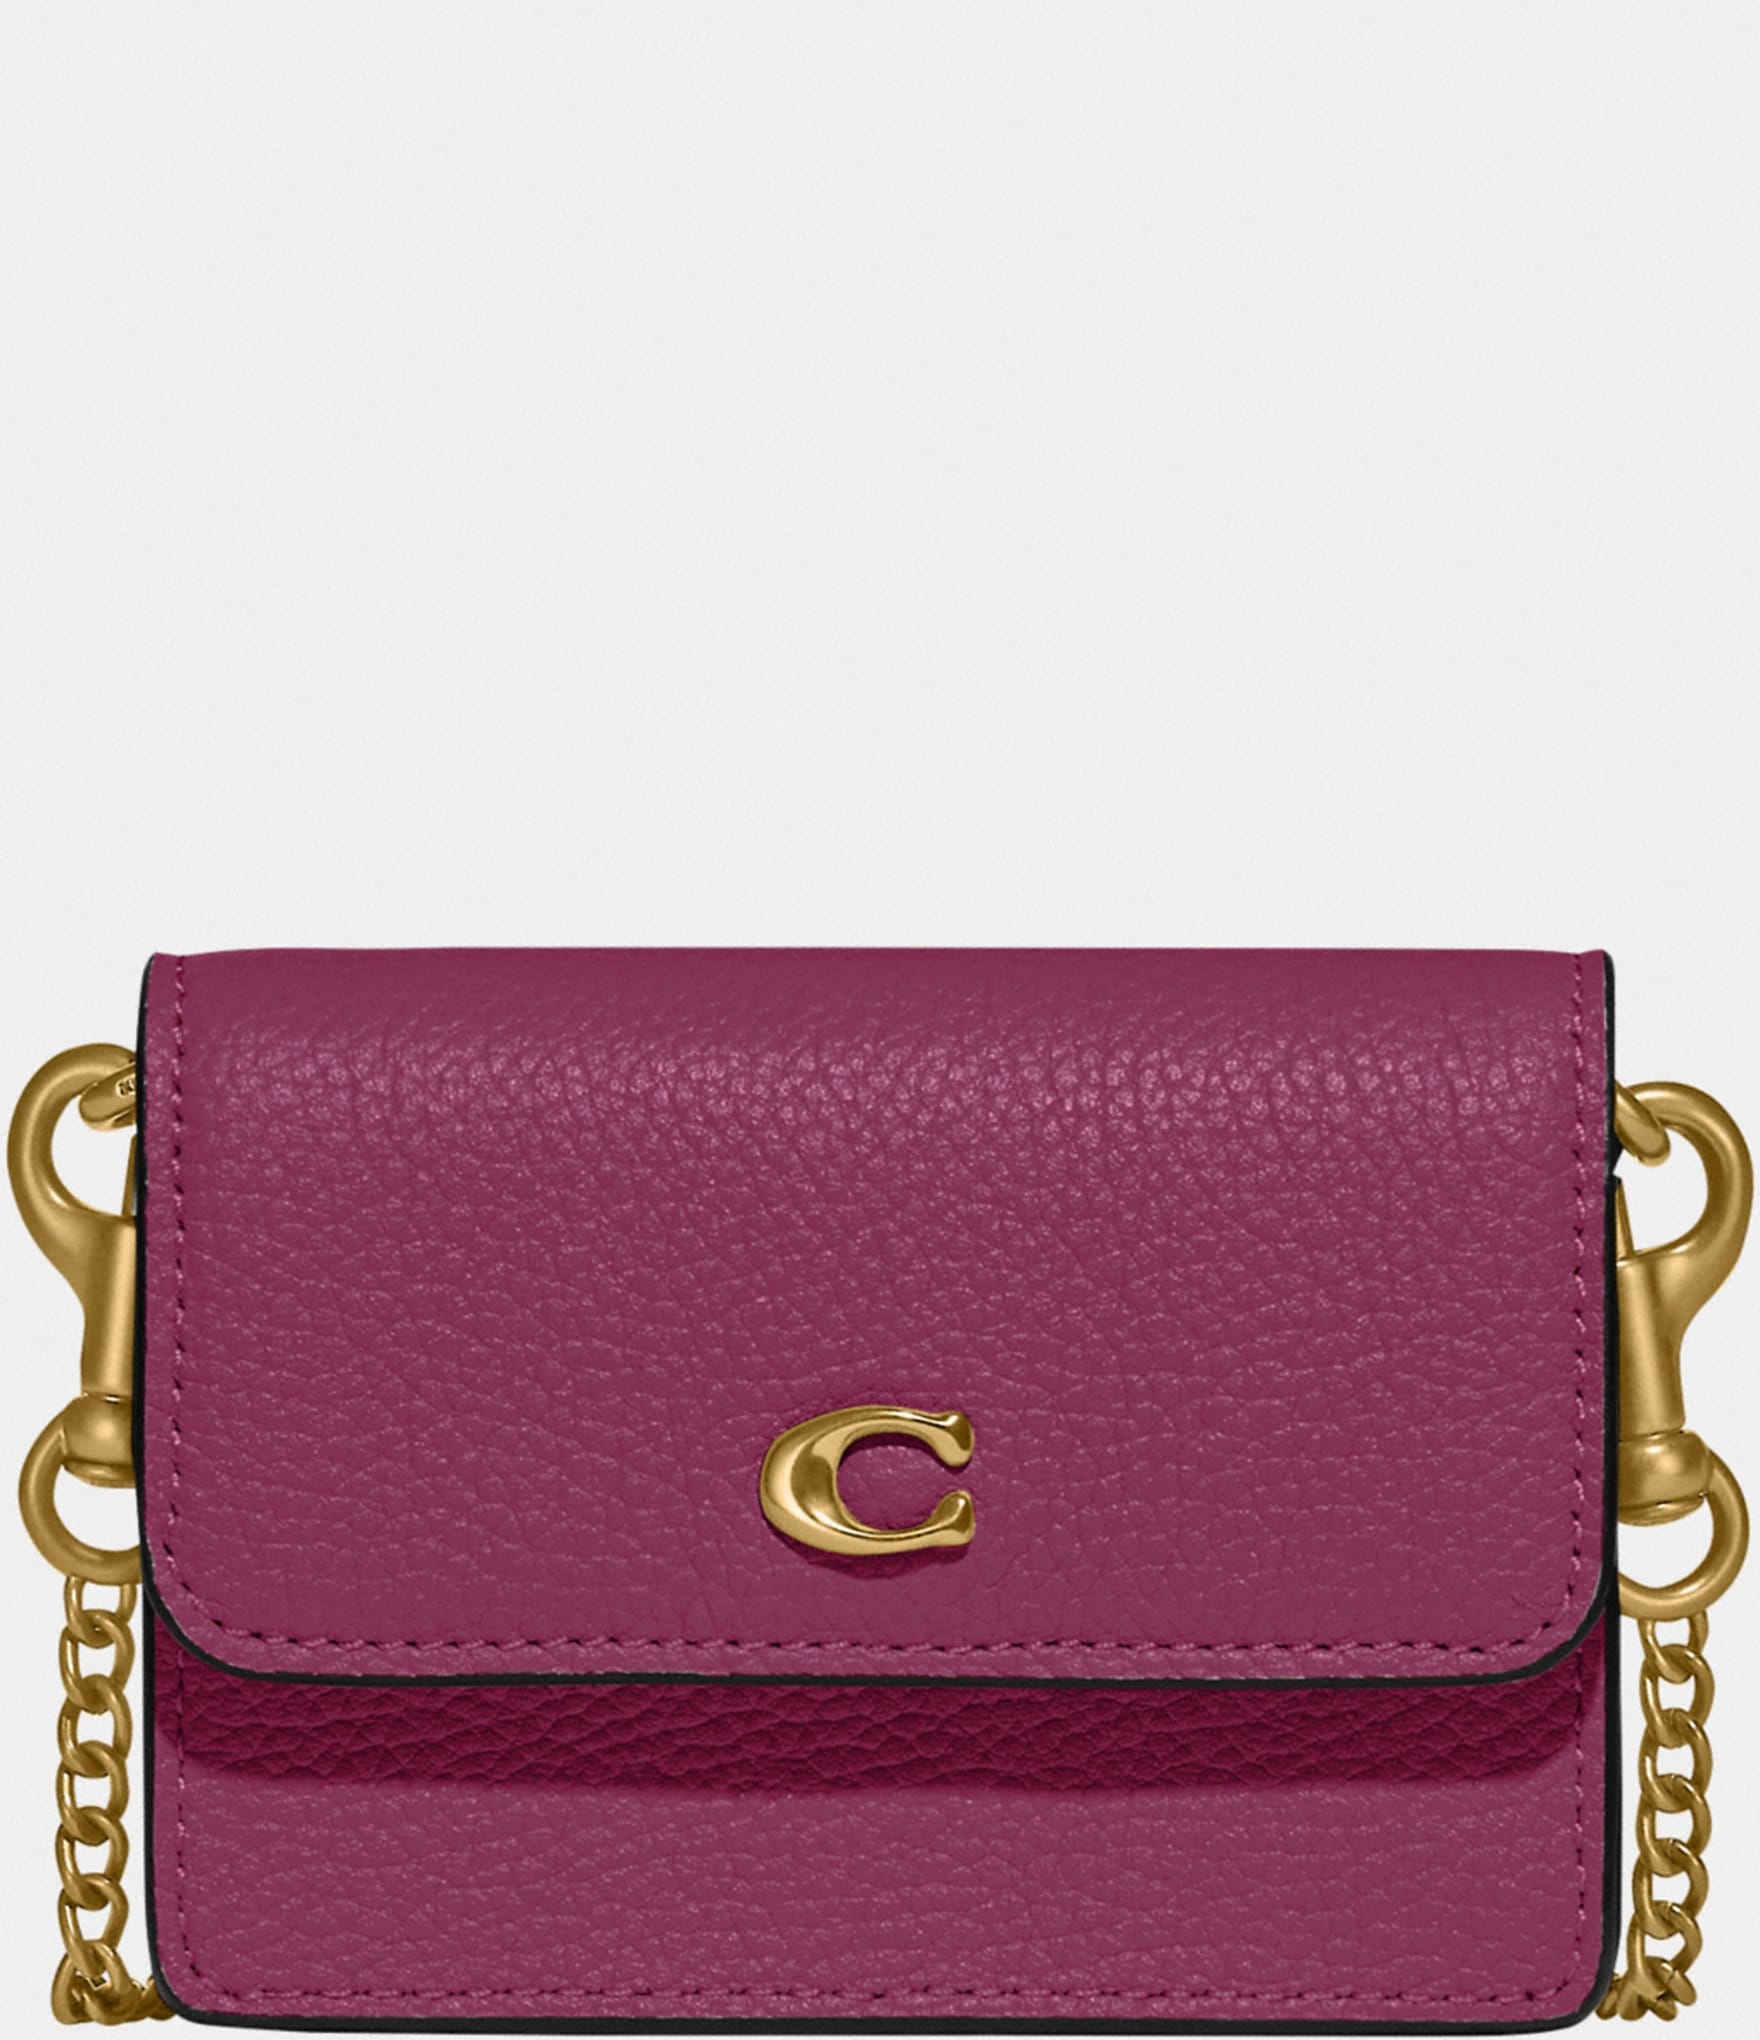 Coach Complimentary Turnlock Card Case With Leather Sequins